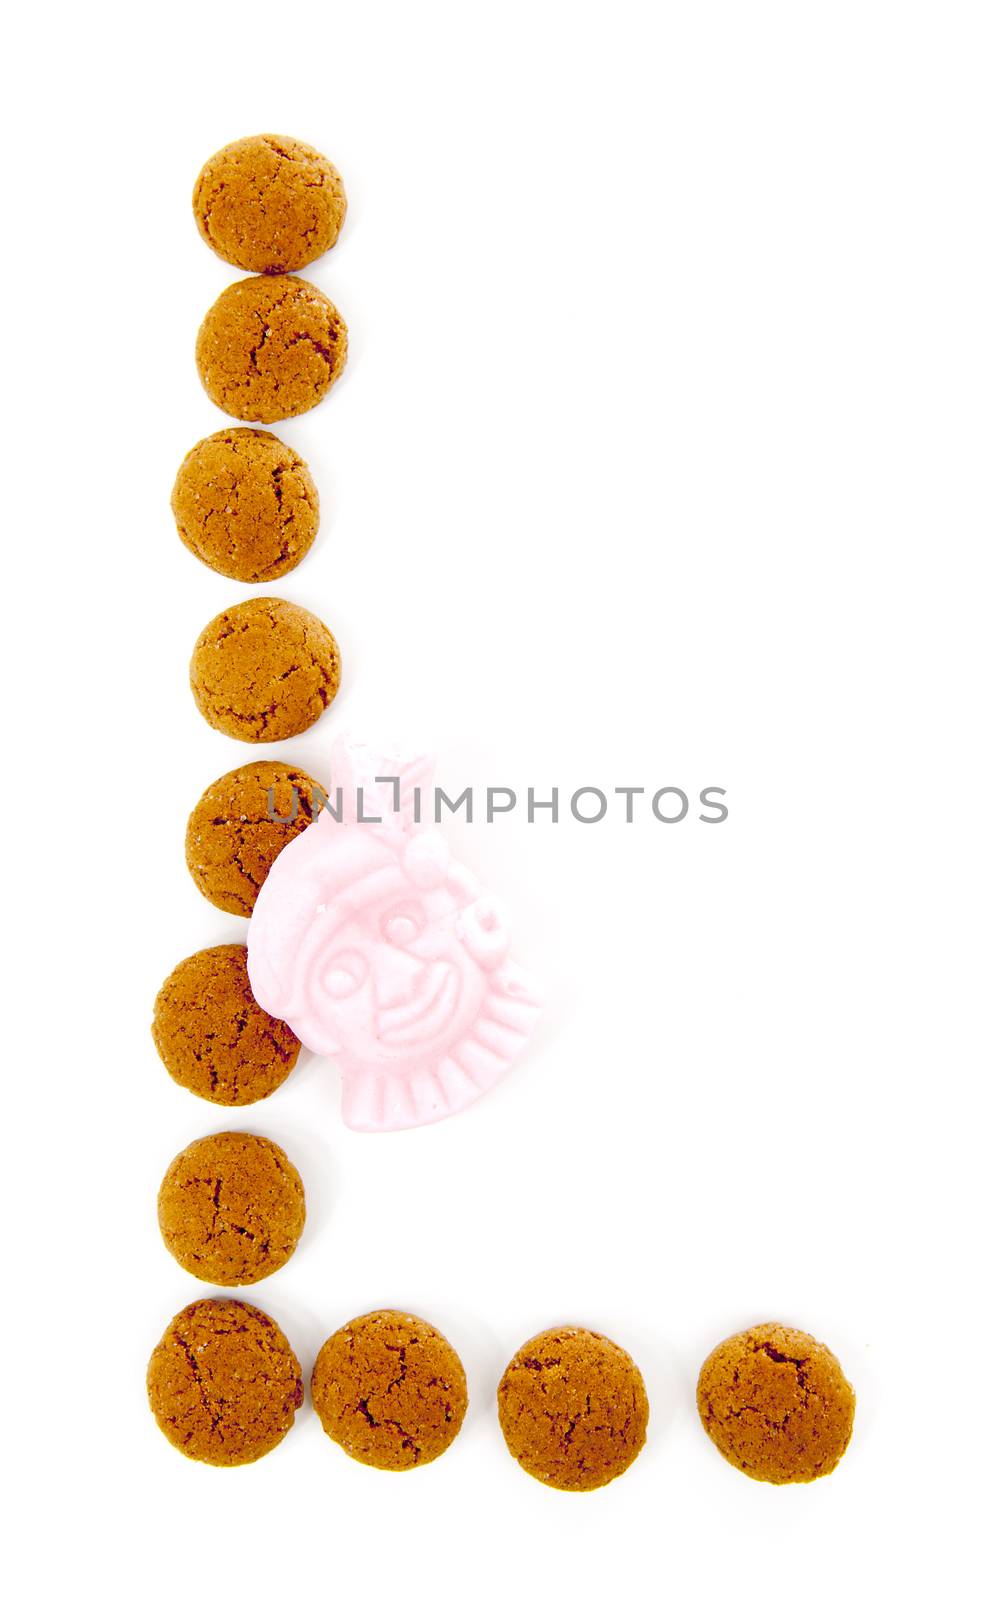 Ginger nuts, pepernoten, in the shape of letter L isolated on white background. Typical Dutch candy for Sinterklaas event in december